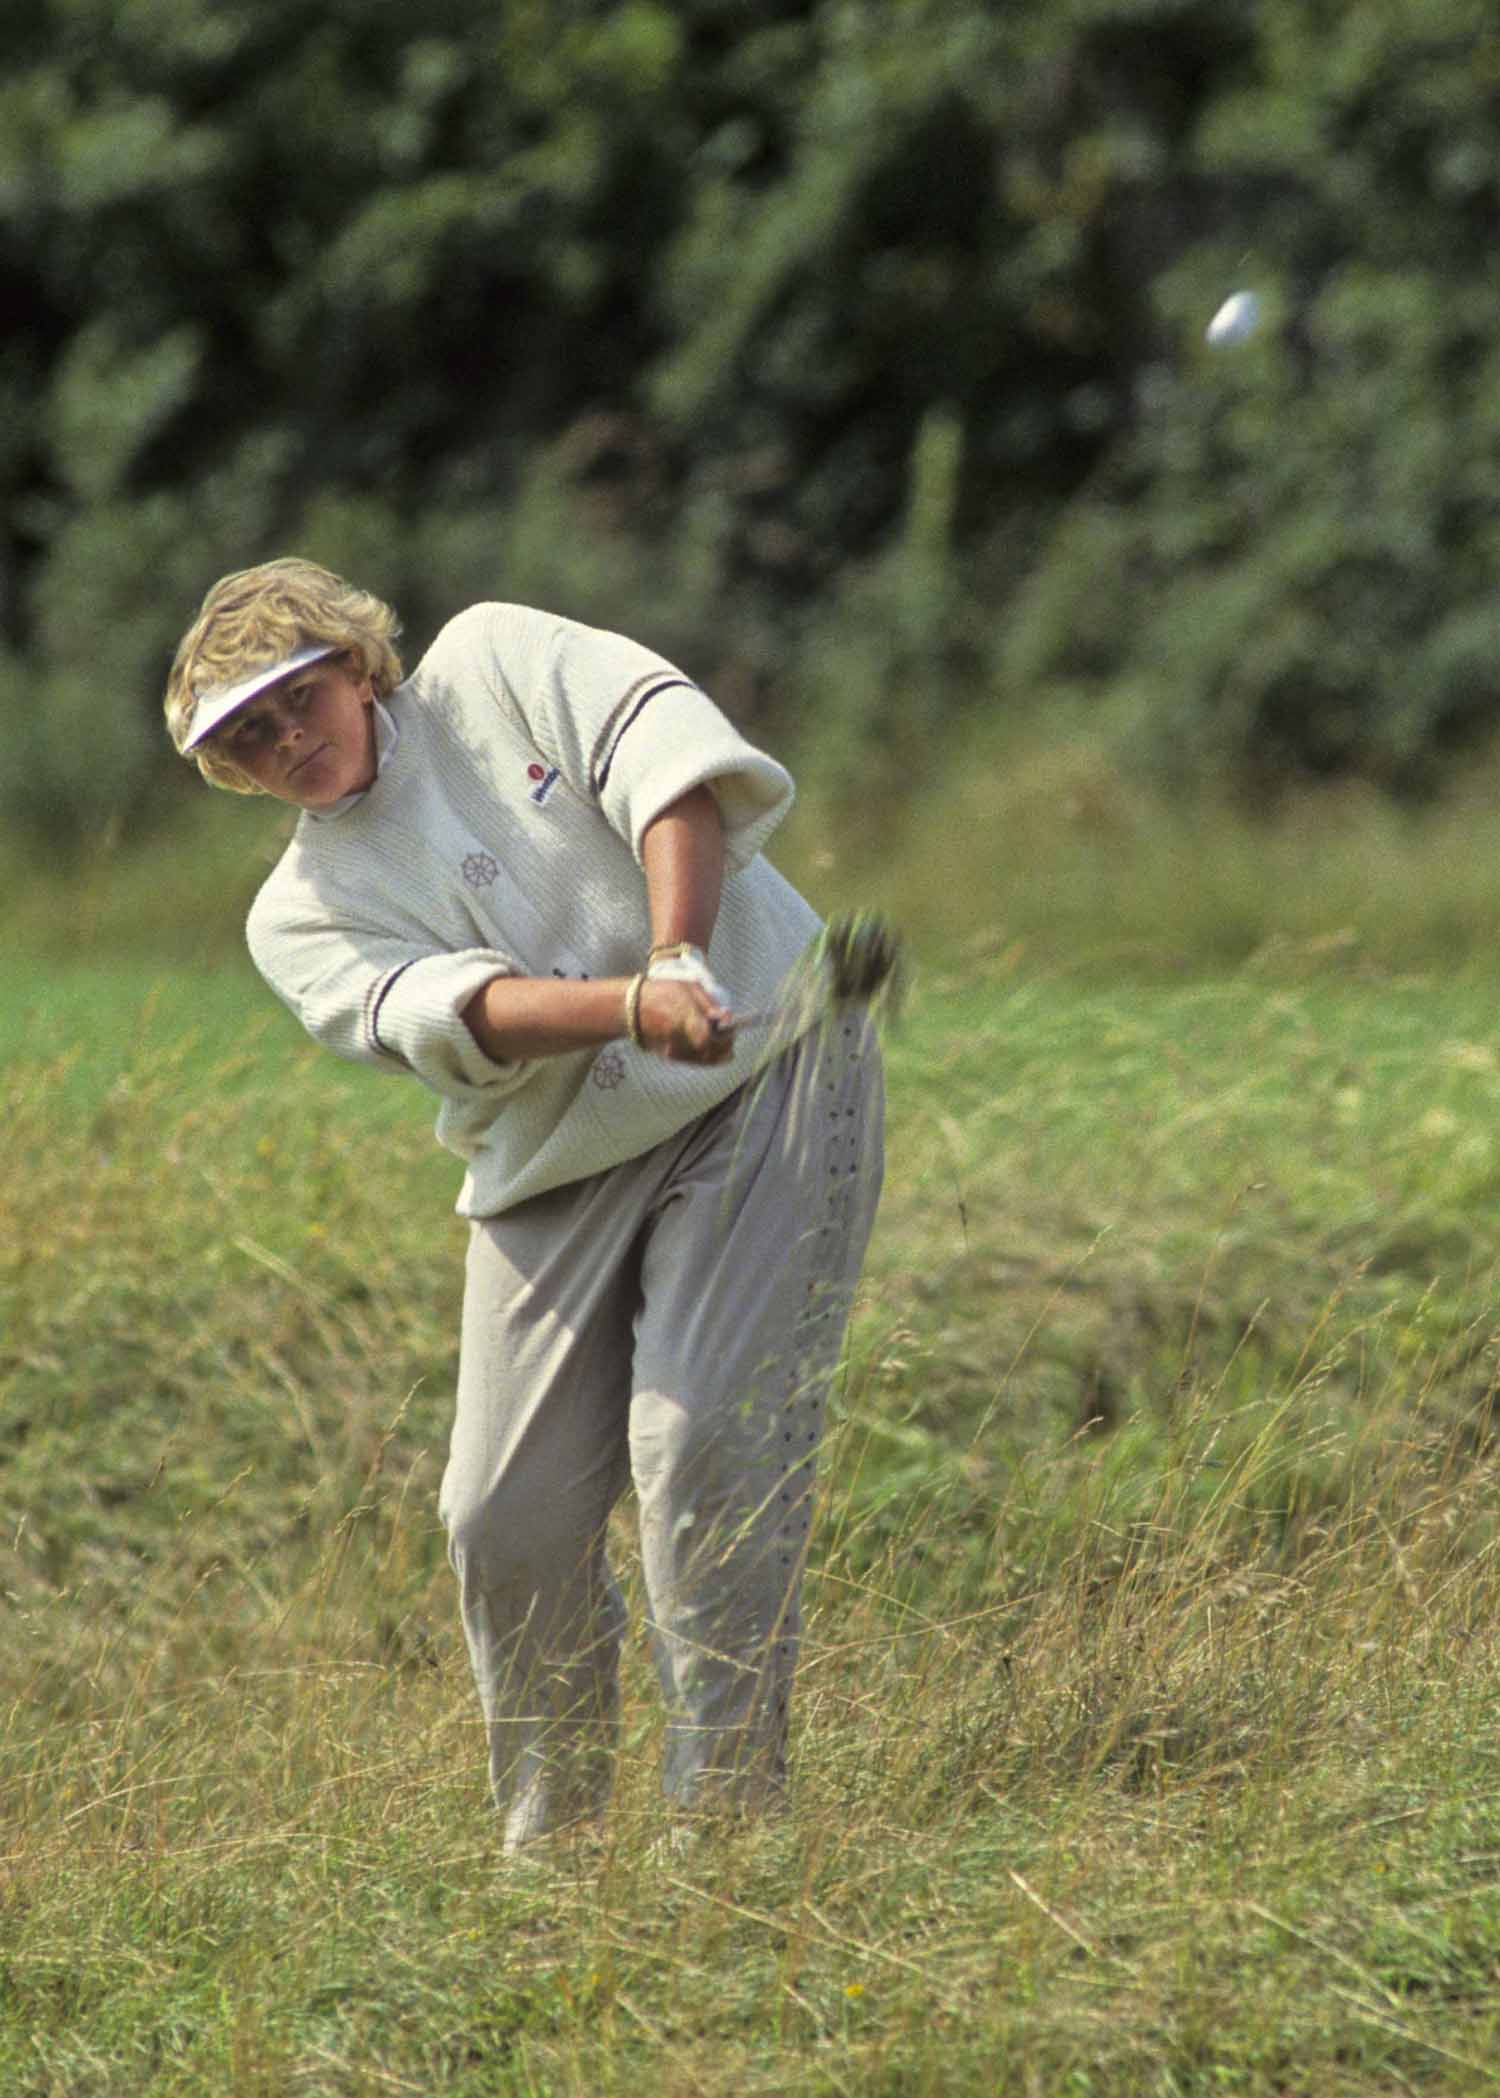 Laura Davies plays her shot from the rough at the 1987 Ladies British Open Championship at St Mellion.